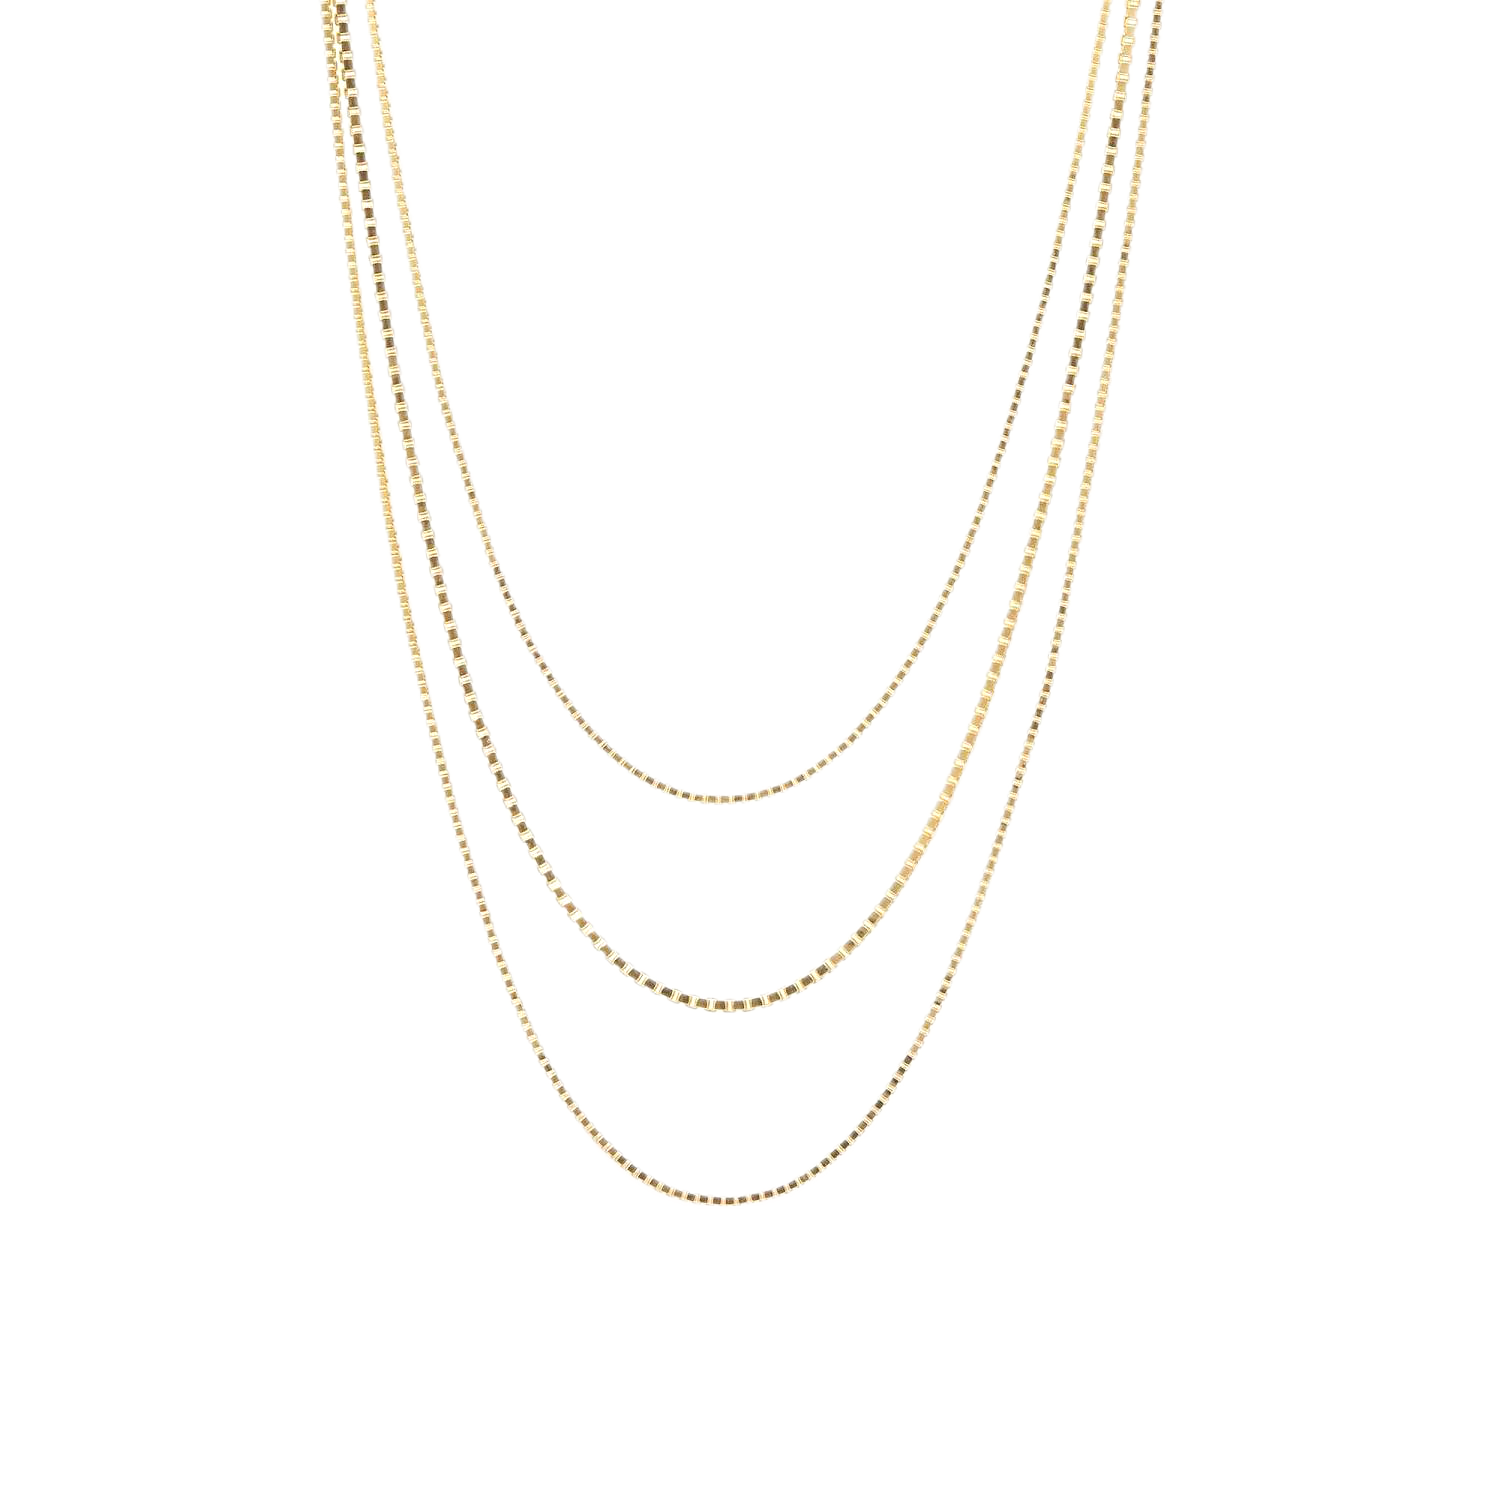 Gold 3 Layered Necklace Chain | Mejuri